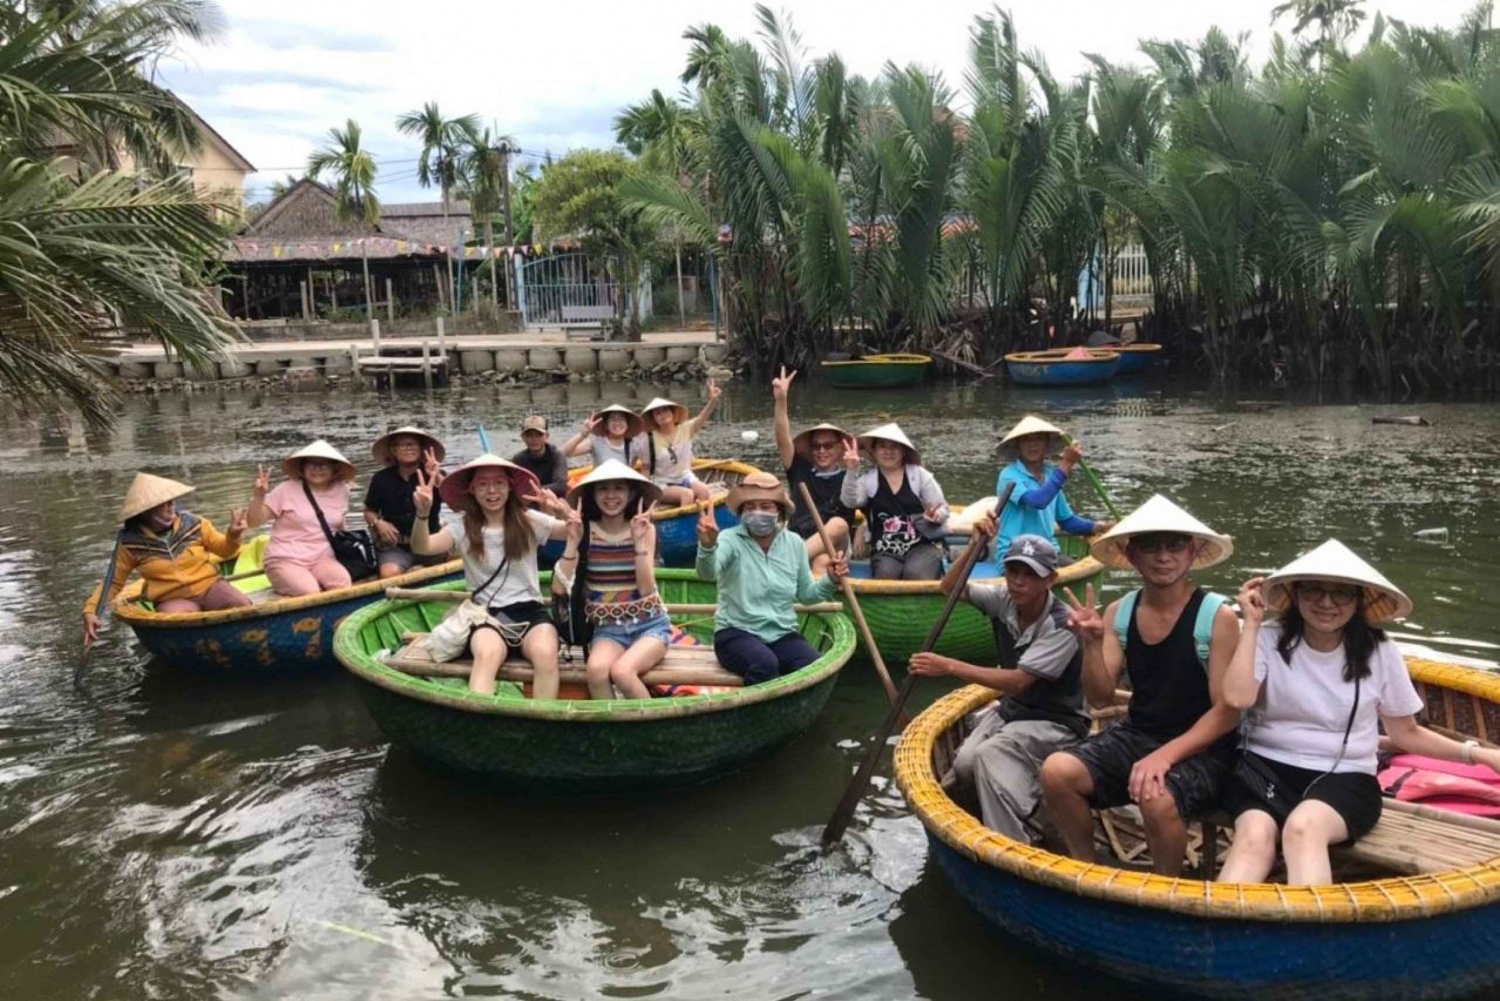 Hoi An: Fishing Village Tour And Cooking Class with Phở